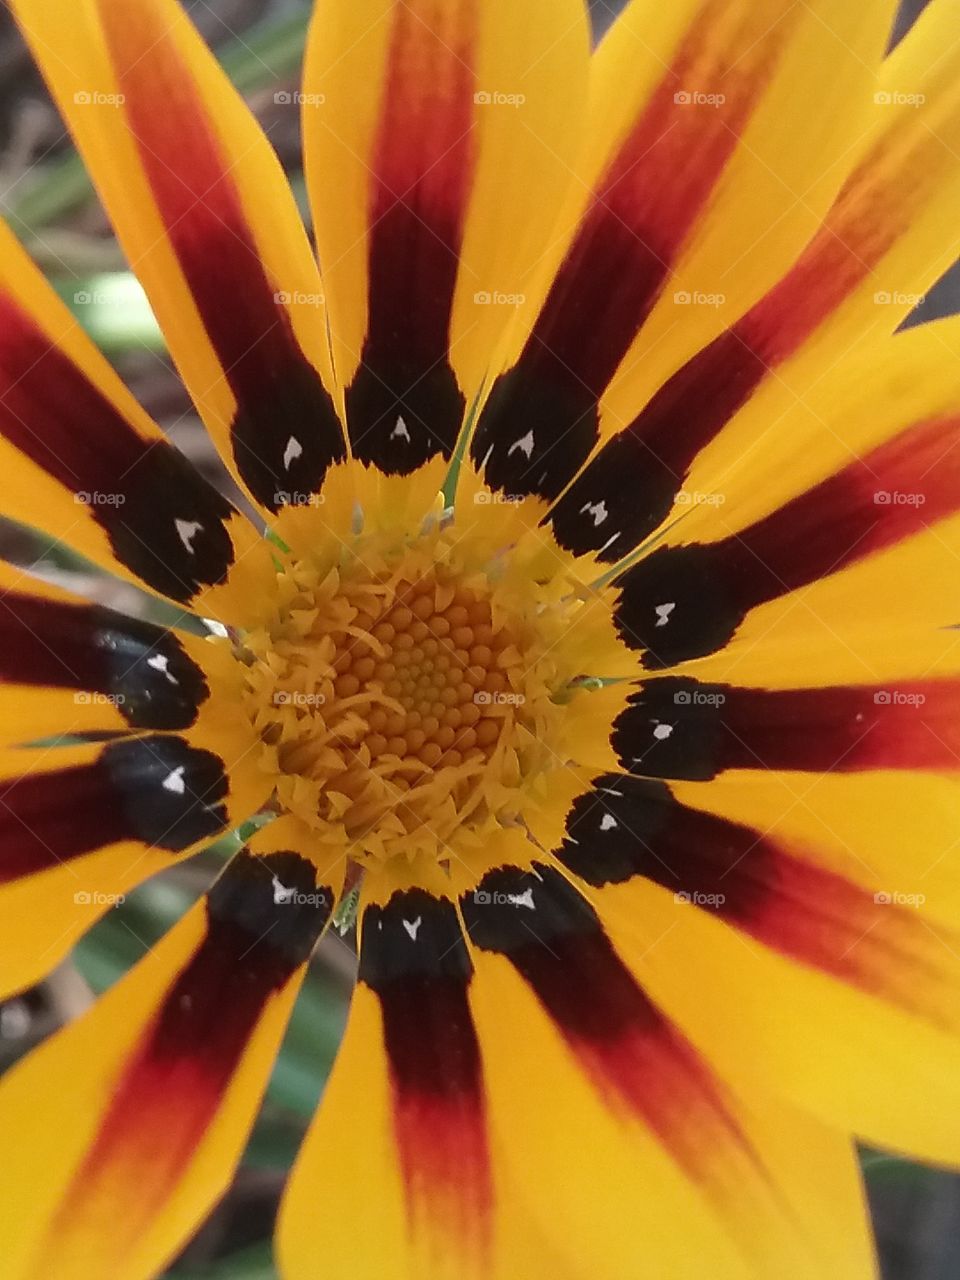 I really do like all the bright colors in this kind of flower.  Bright yellow, orange, red and Brown's with just enough black so you can see that tiny little white dot all the way around.